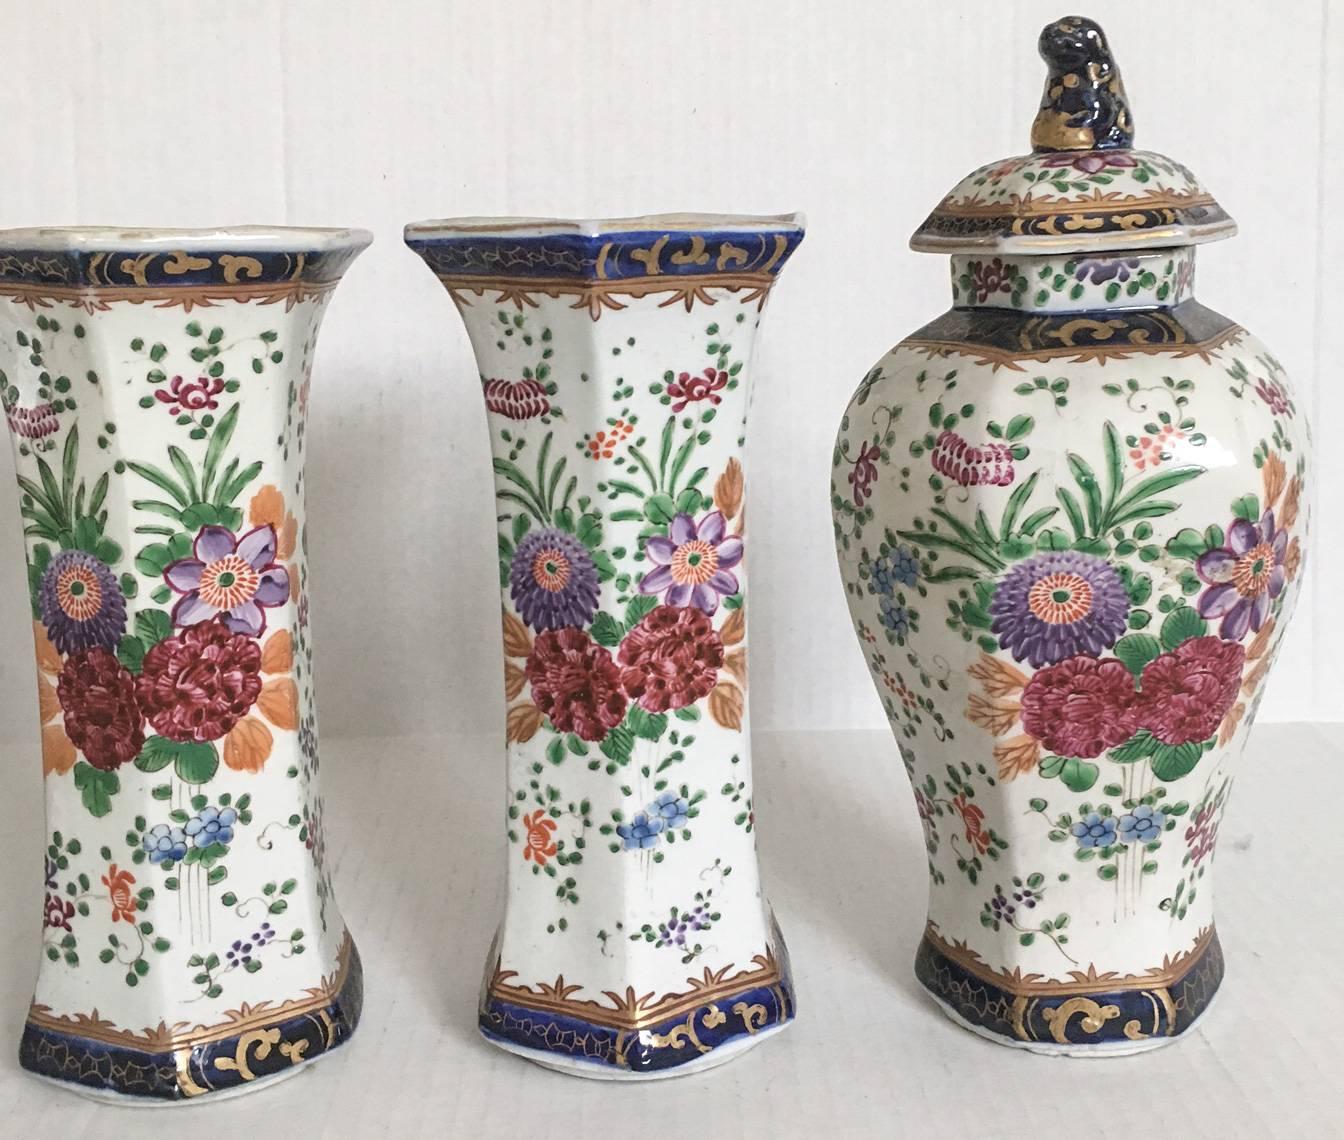 Romantic 18th Century French Octagonal Faience Garniture Vases, Set of Four